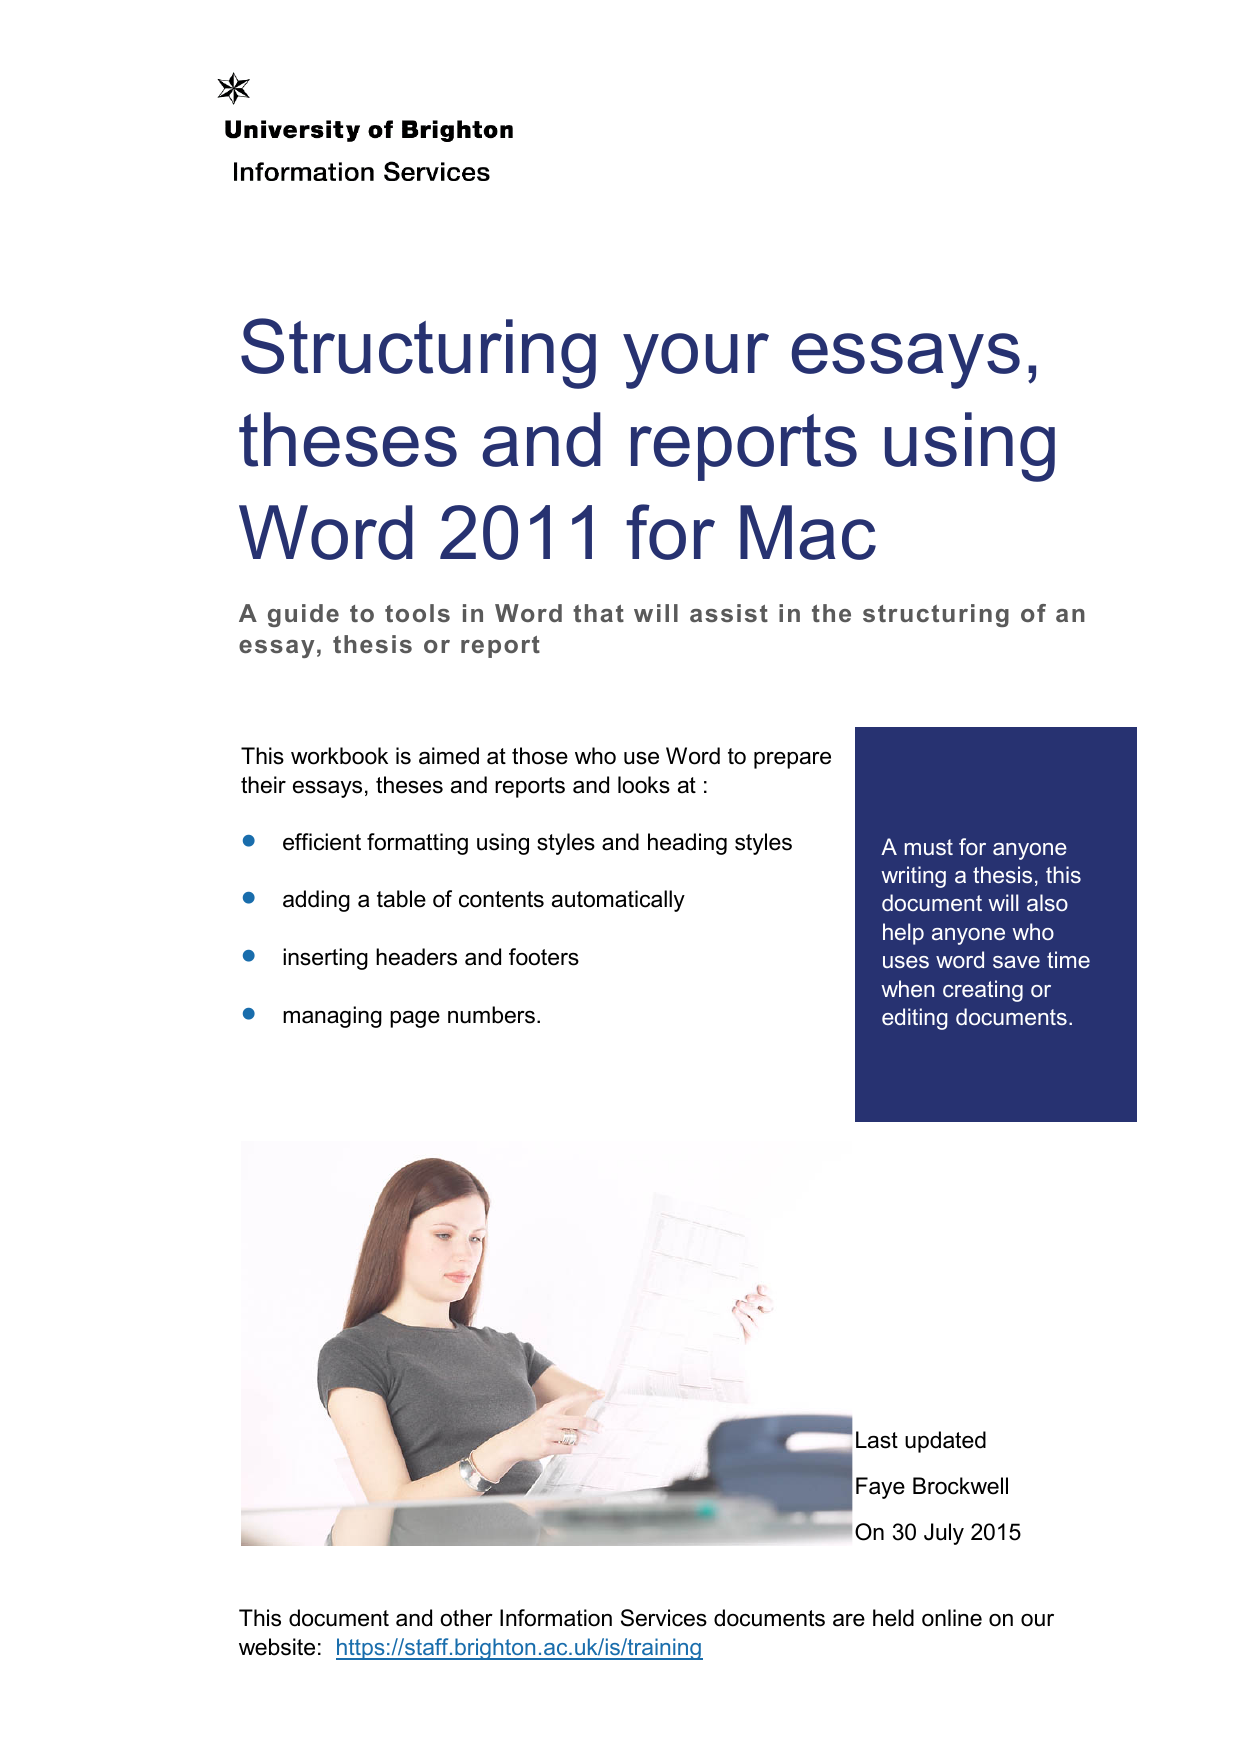 find styles toolbox in microsoft word for mac